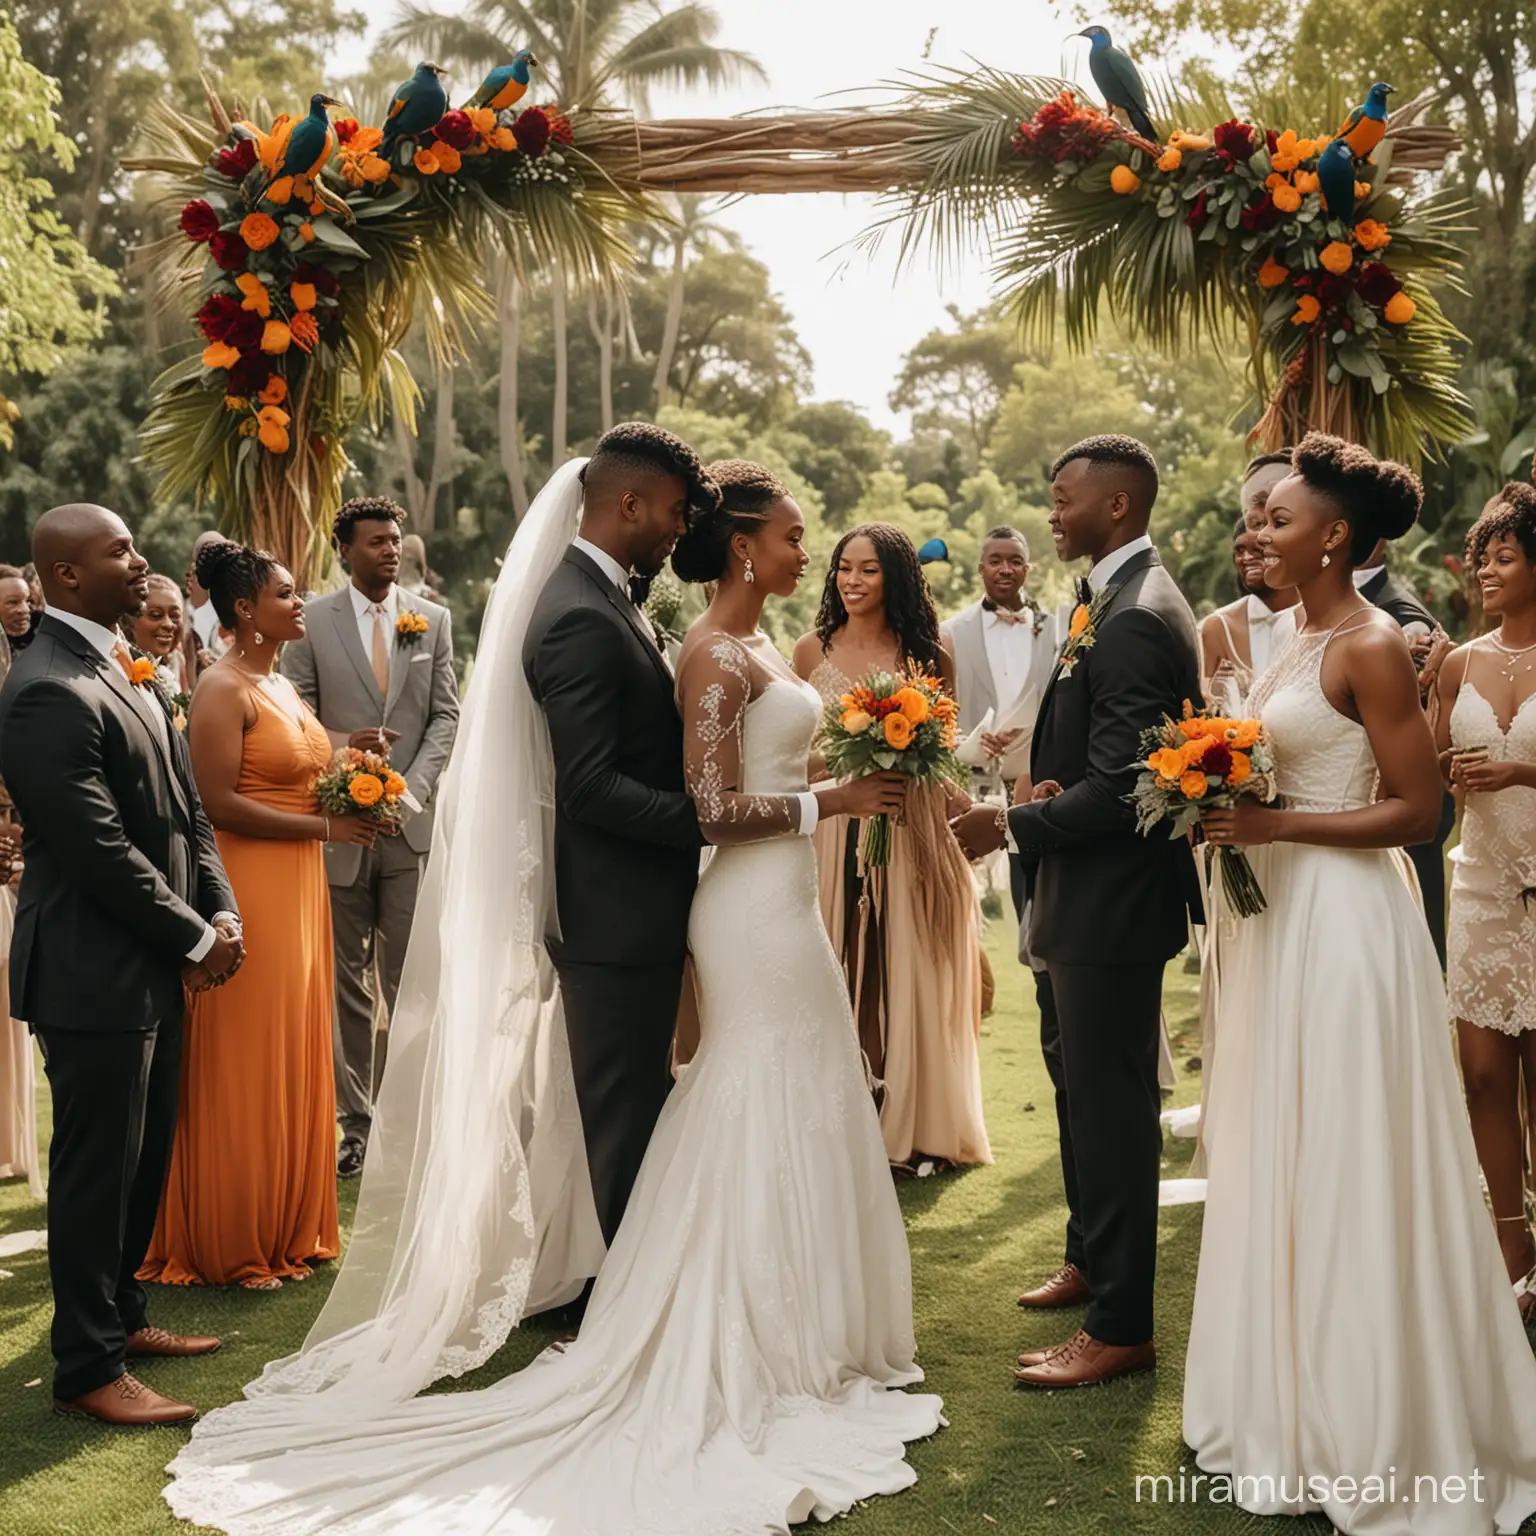 Outdoor Wedding Celebration with Diverse Guests and Exotic Bird Sanctuary